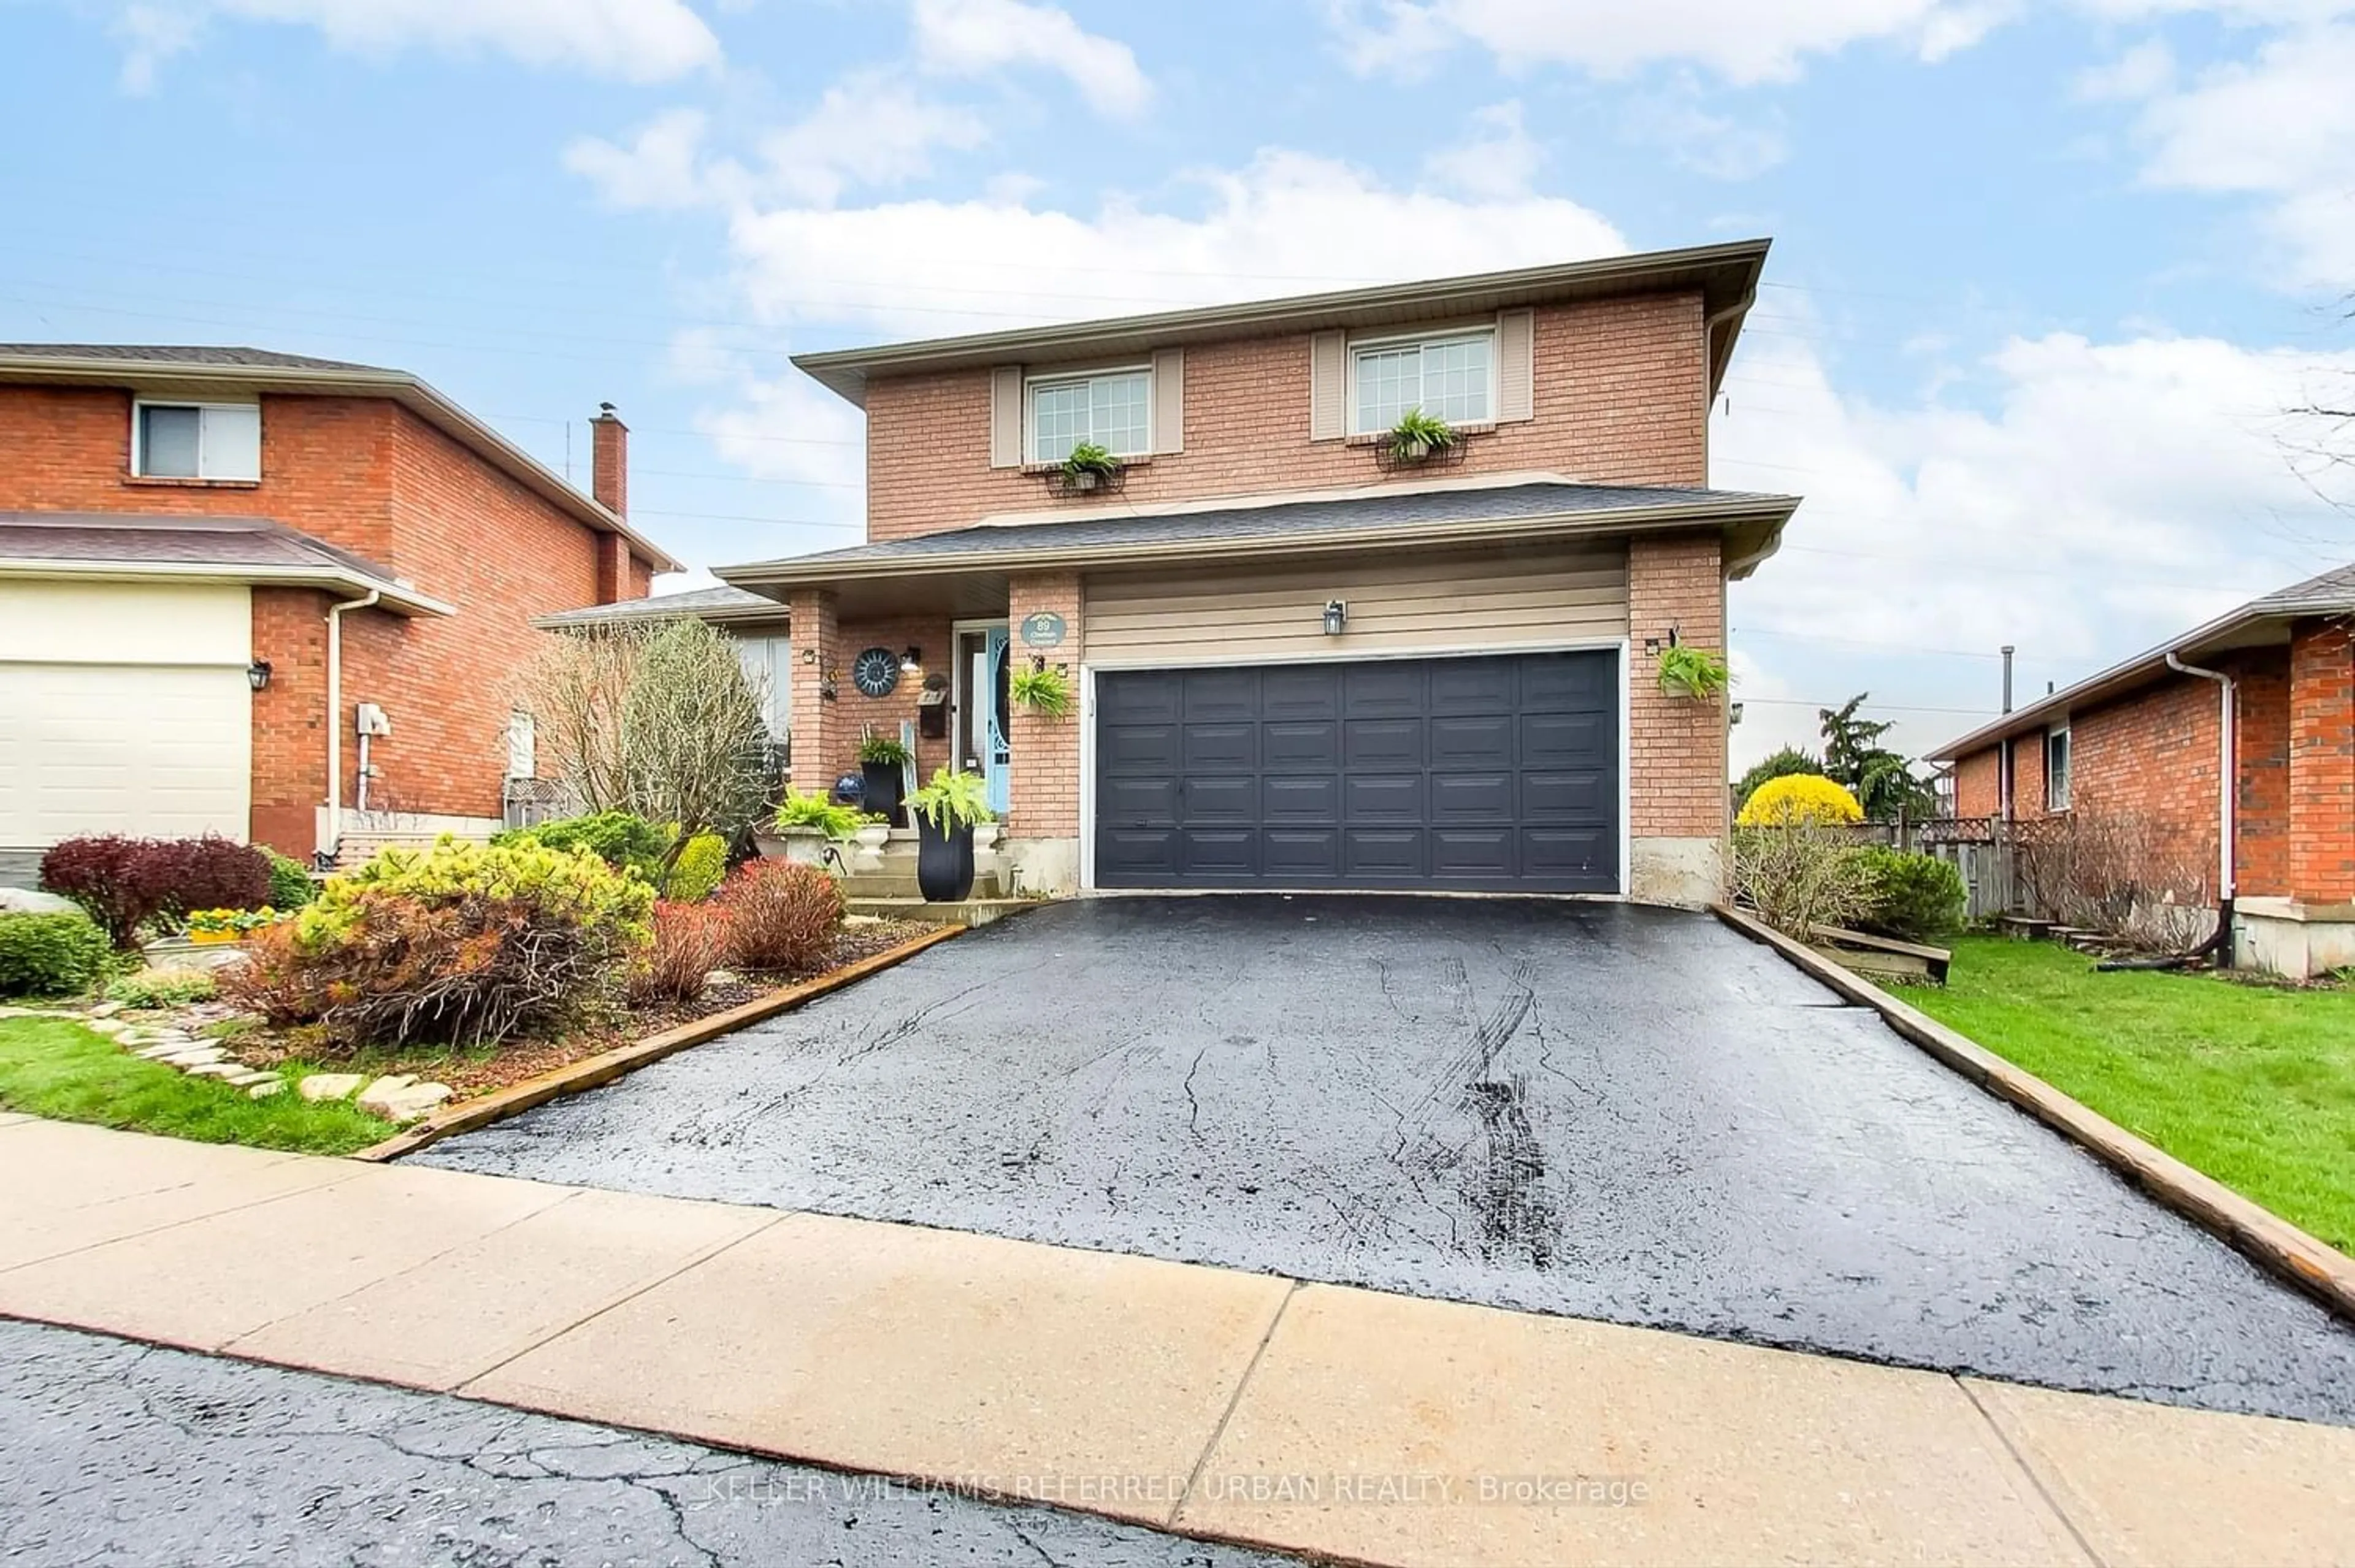 Home with brick exterior material for 89 Chieftain Cres, Barrie Ontario L4N 6J2